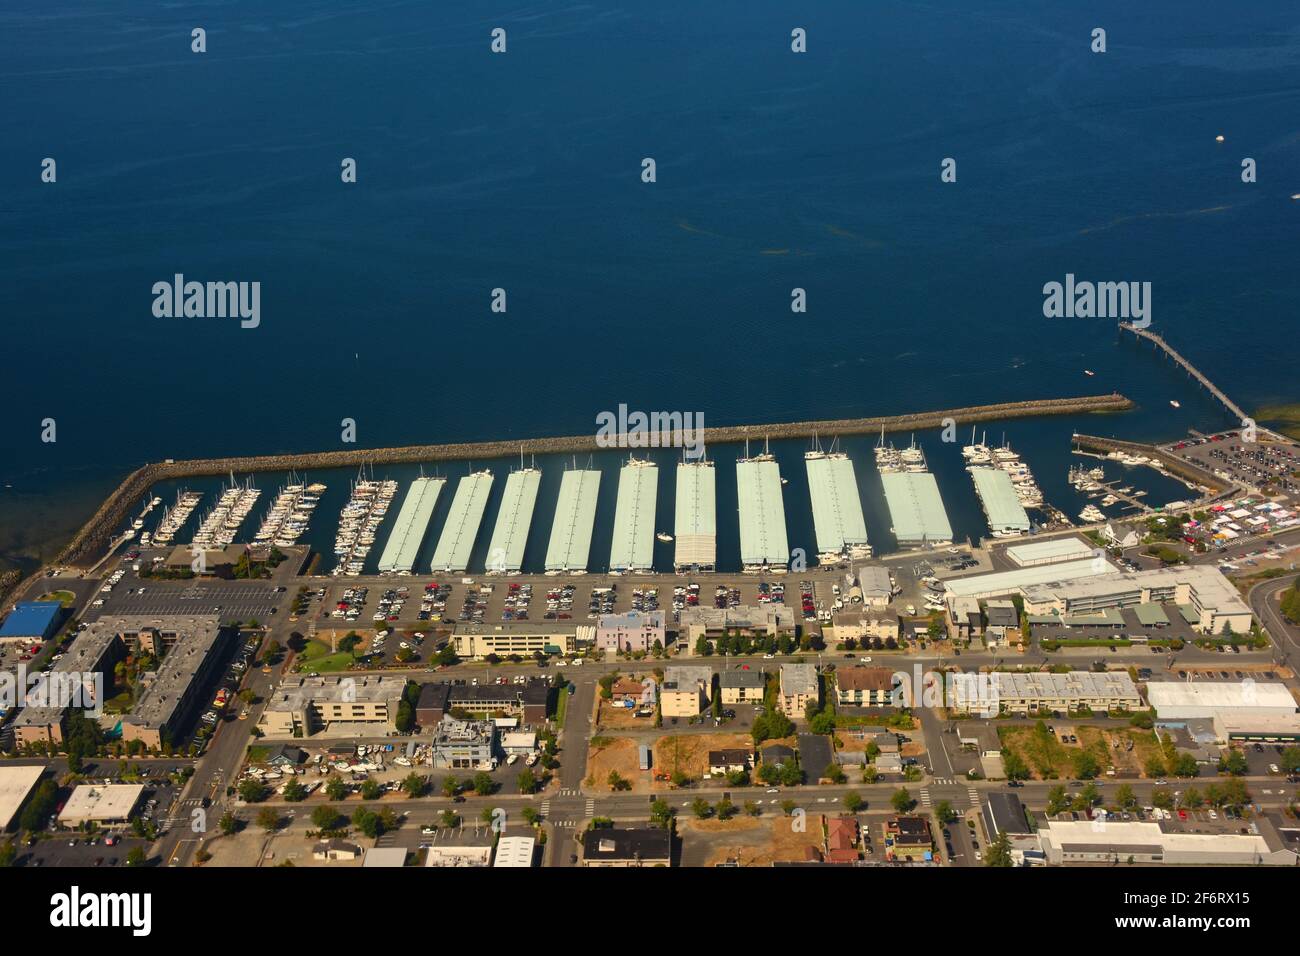 City of Des Moines Marina in Seattle, Washington, Aerial view Stock Photo